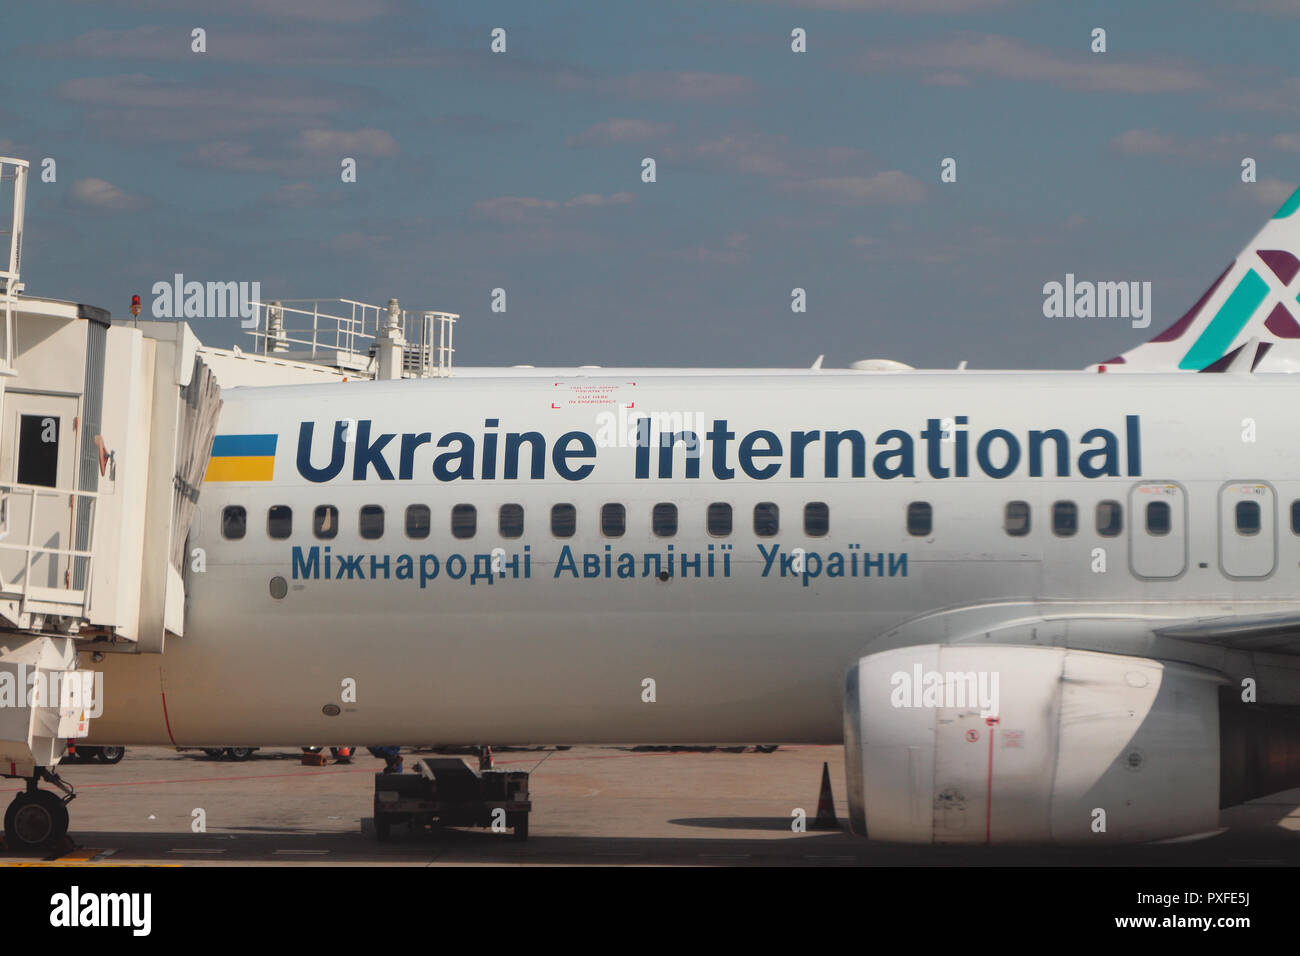 Milan, Italy - Sep 25, 2018: Aircraft fuselage of airline 'Ukraine International Airlines' Stock Photo